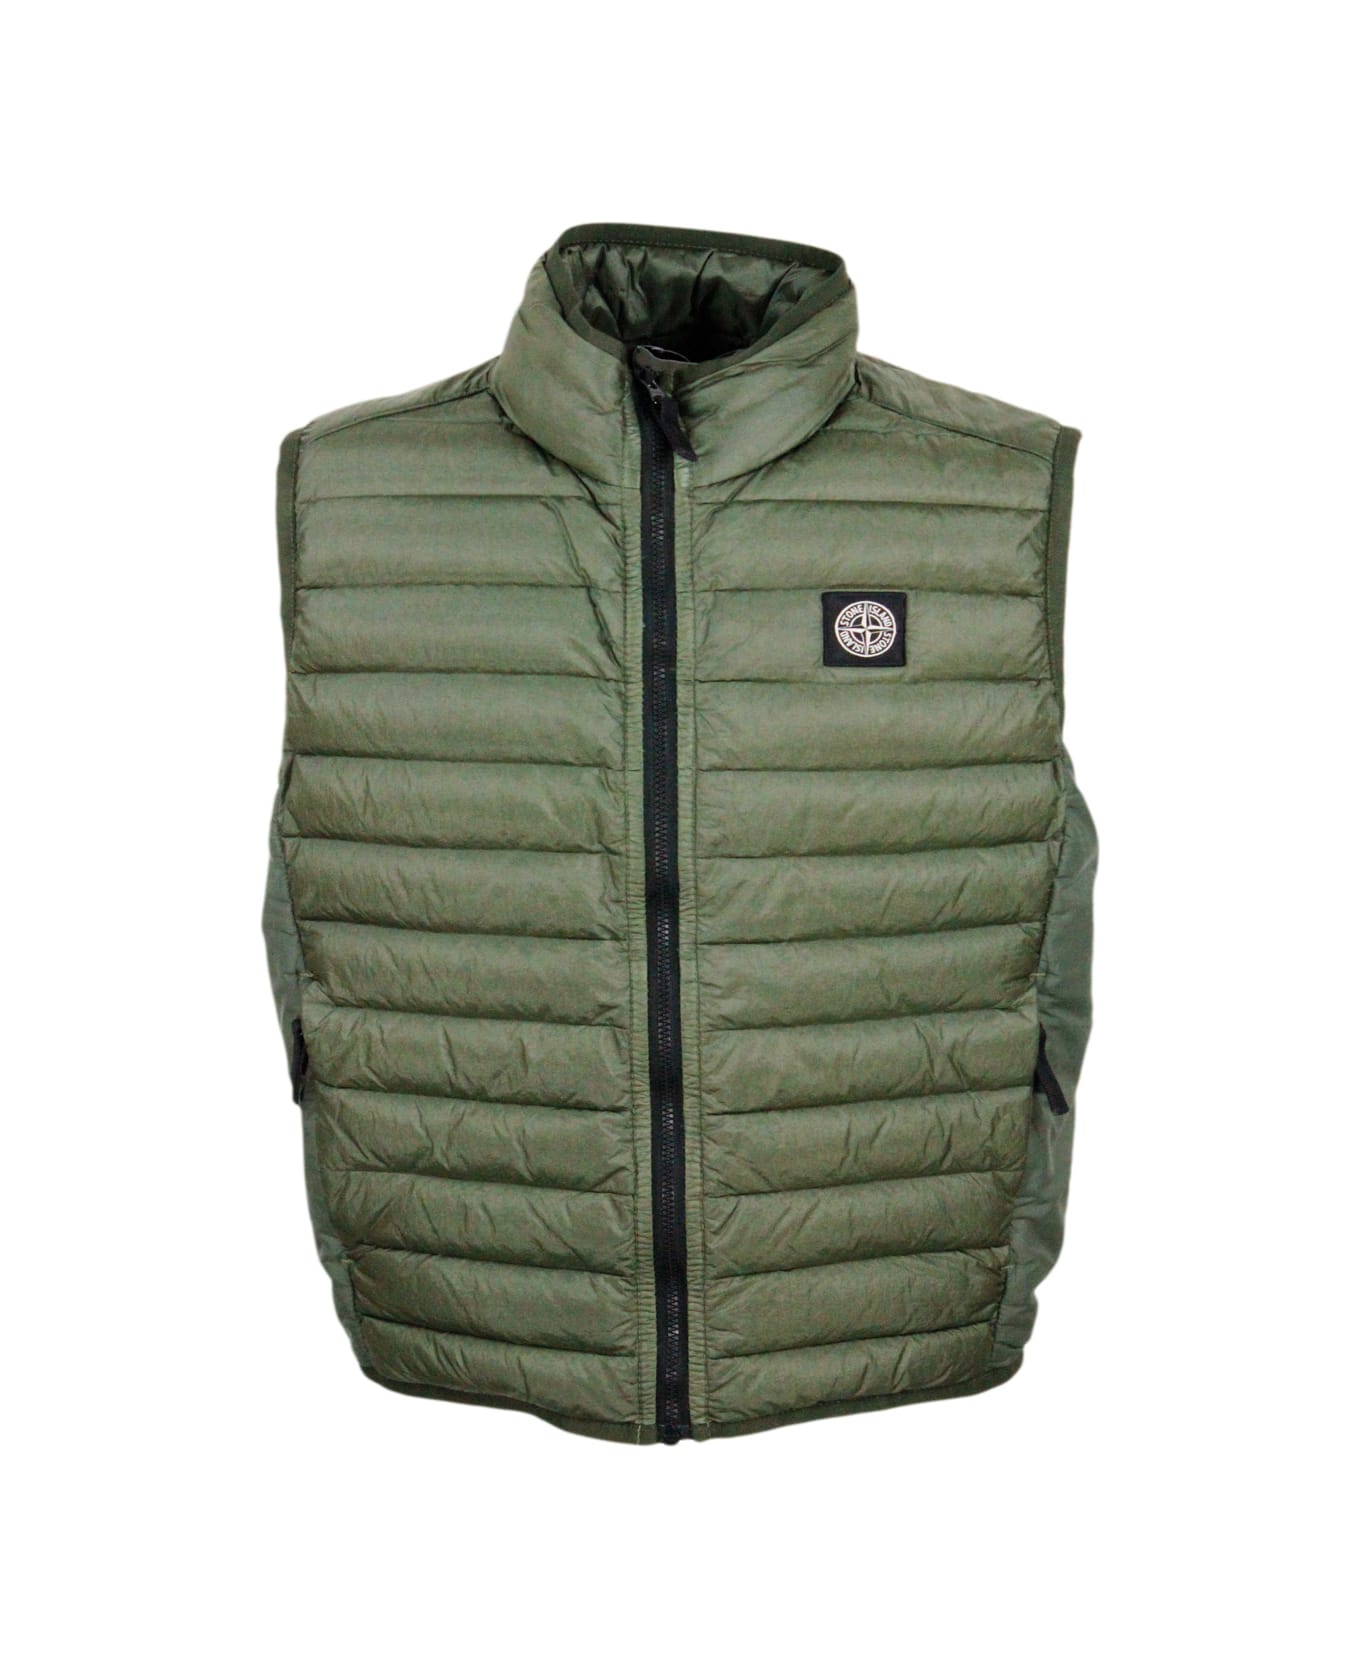 Stone Island Junior 100 Gram Padded Sleeveless Down Vest Made Of Recycled Crisp Nylon. Zip Closure And Logo On The Chest - Military